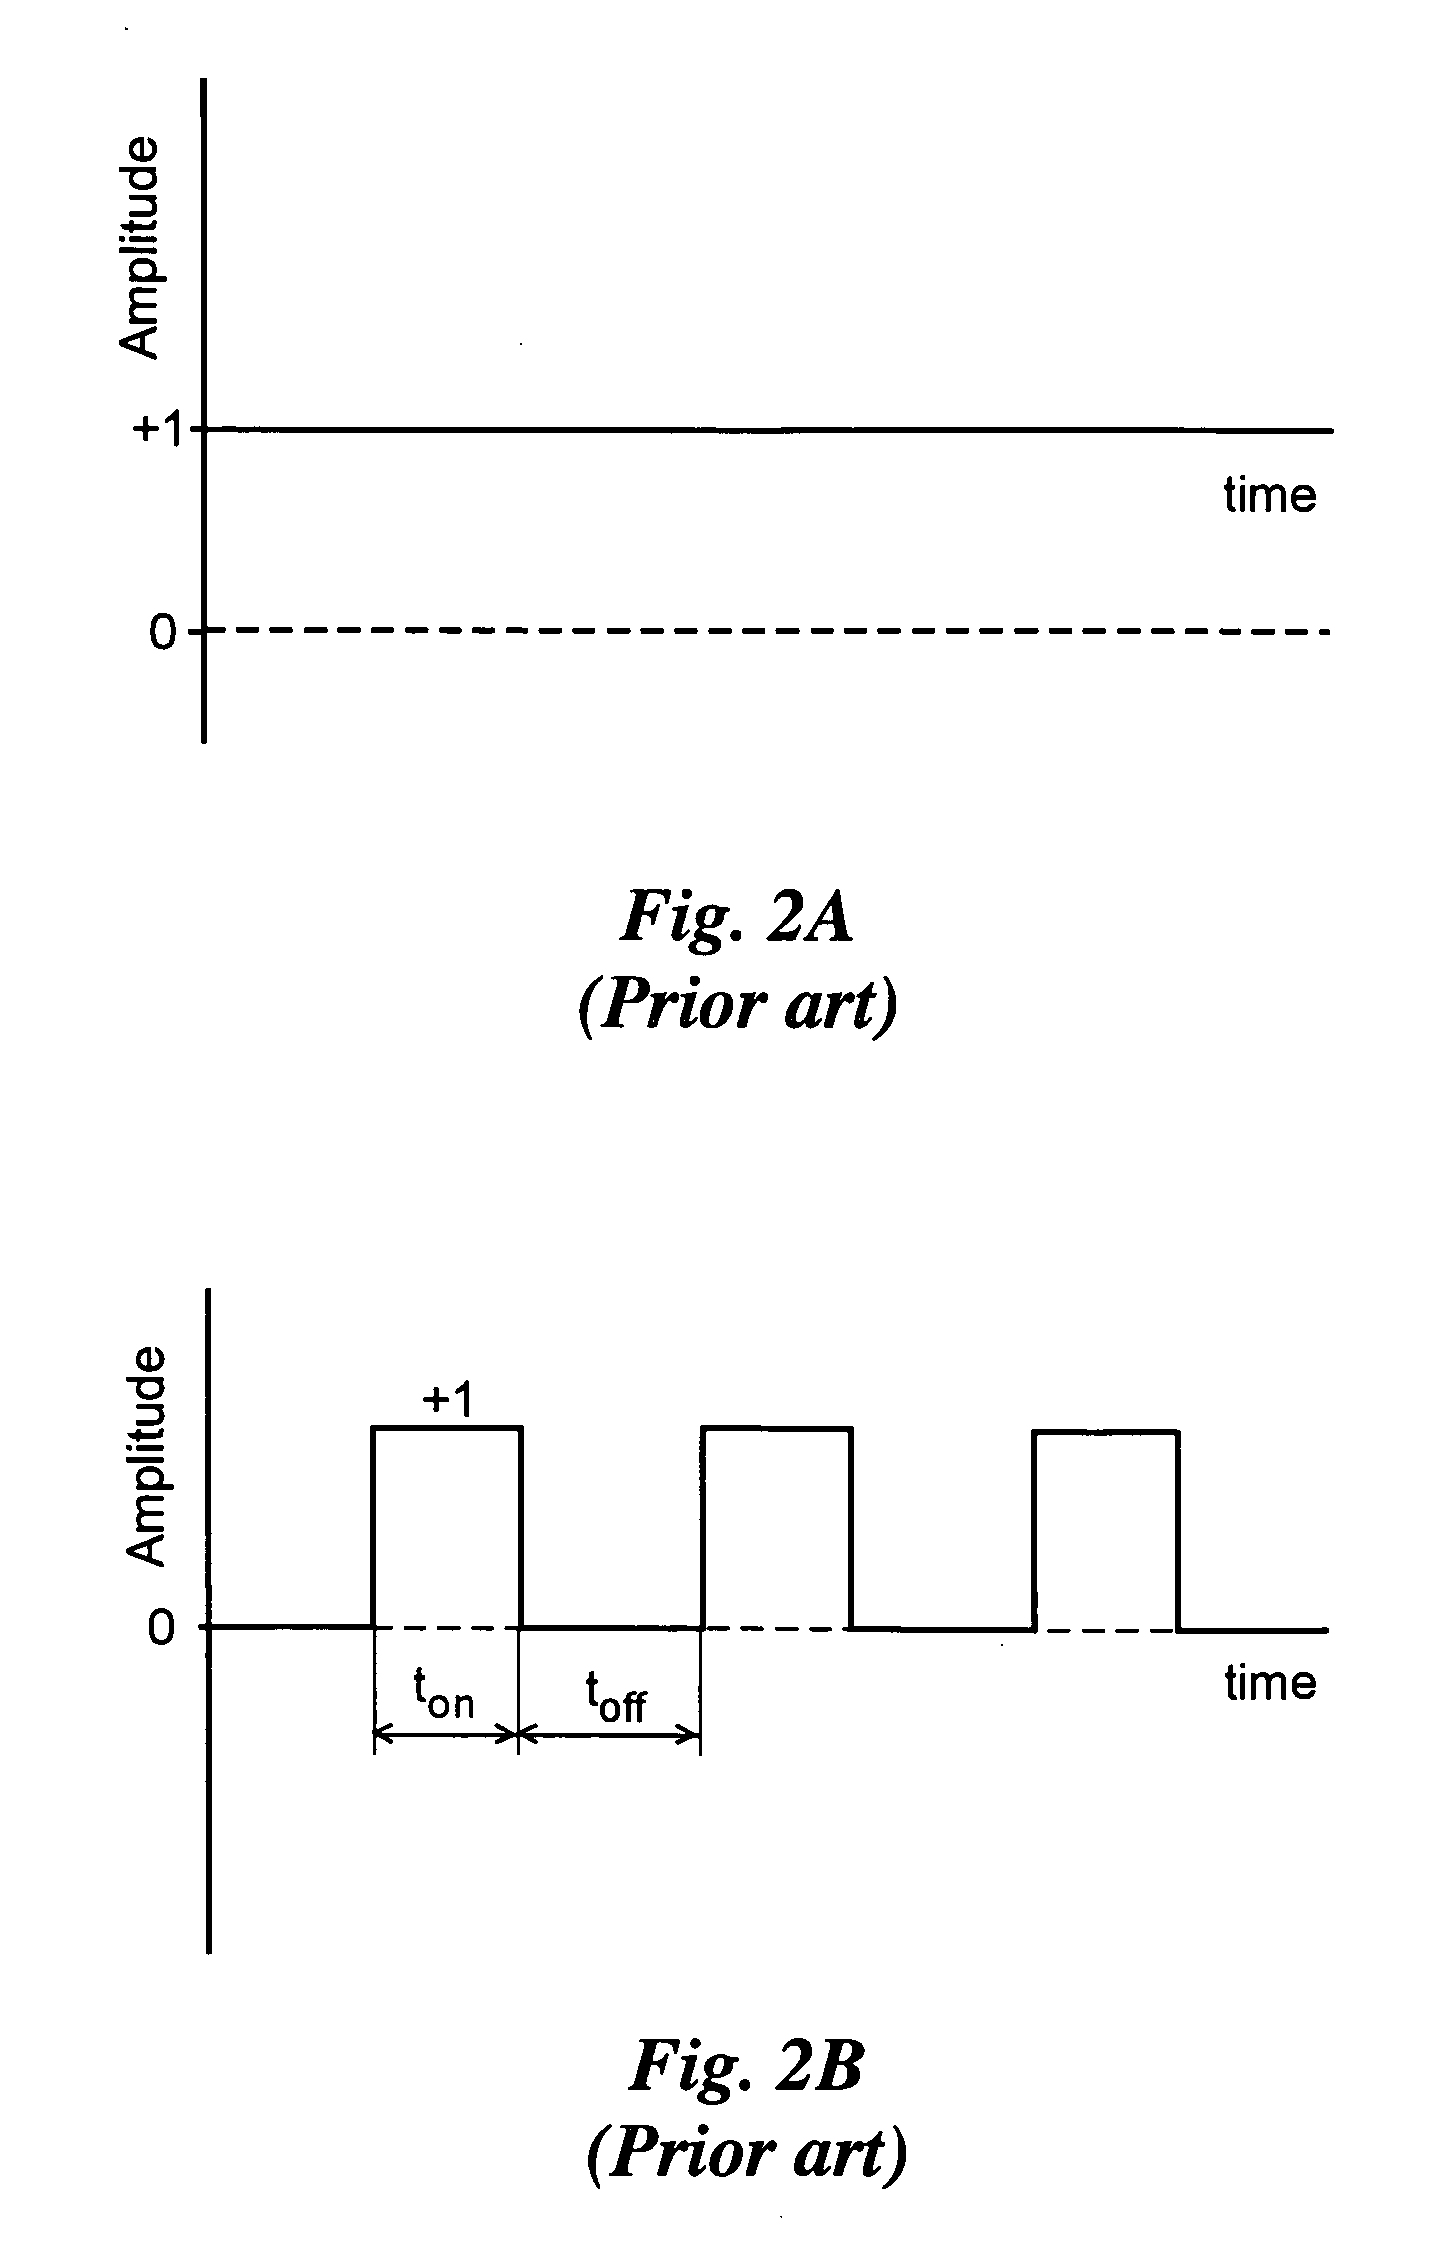 Method for producing alloy deposits and controlling the nanostructure thereof using negative current pulsing electro-deposition, and articles incorporating such deposits